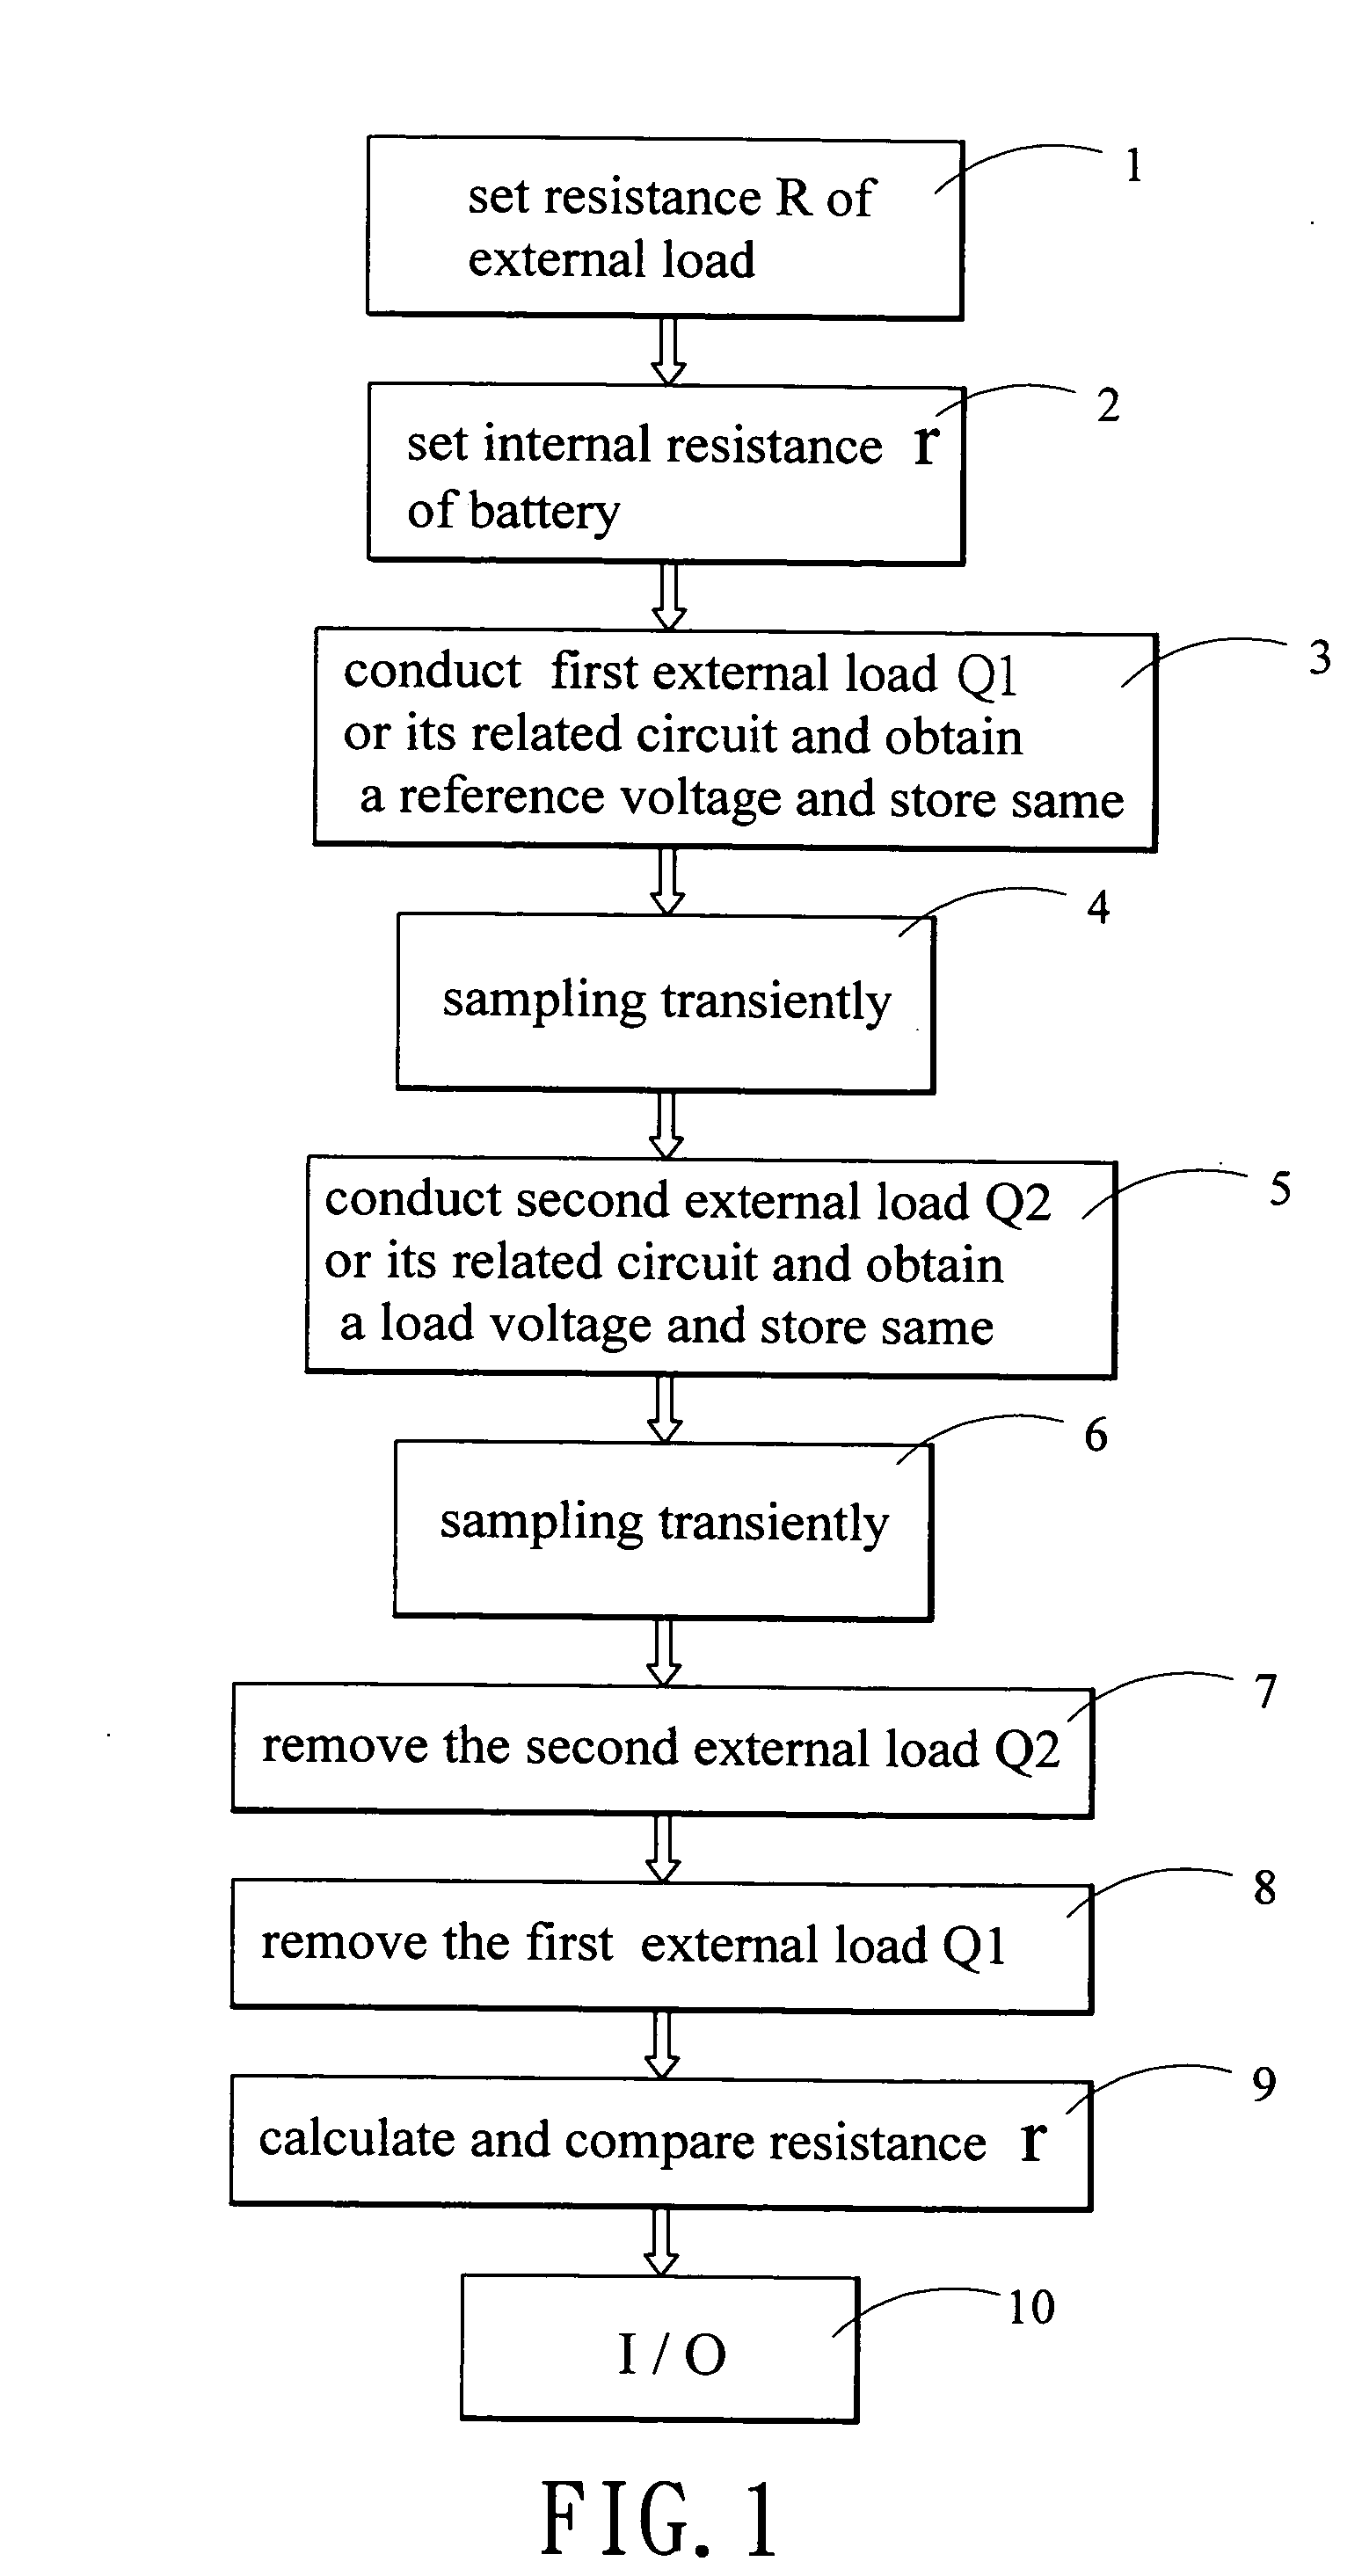 Method and apparatus for monitoring the condition of a battery by measuring its internal resistance